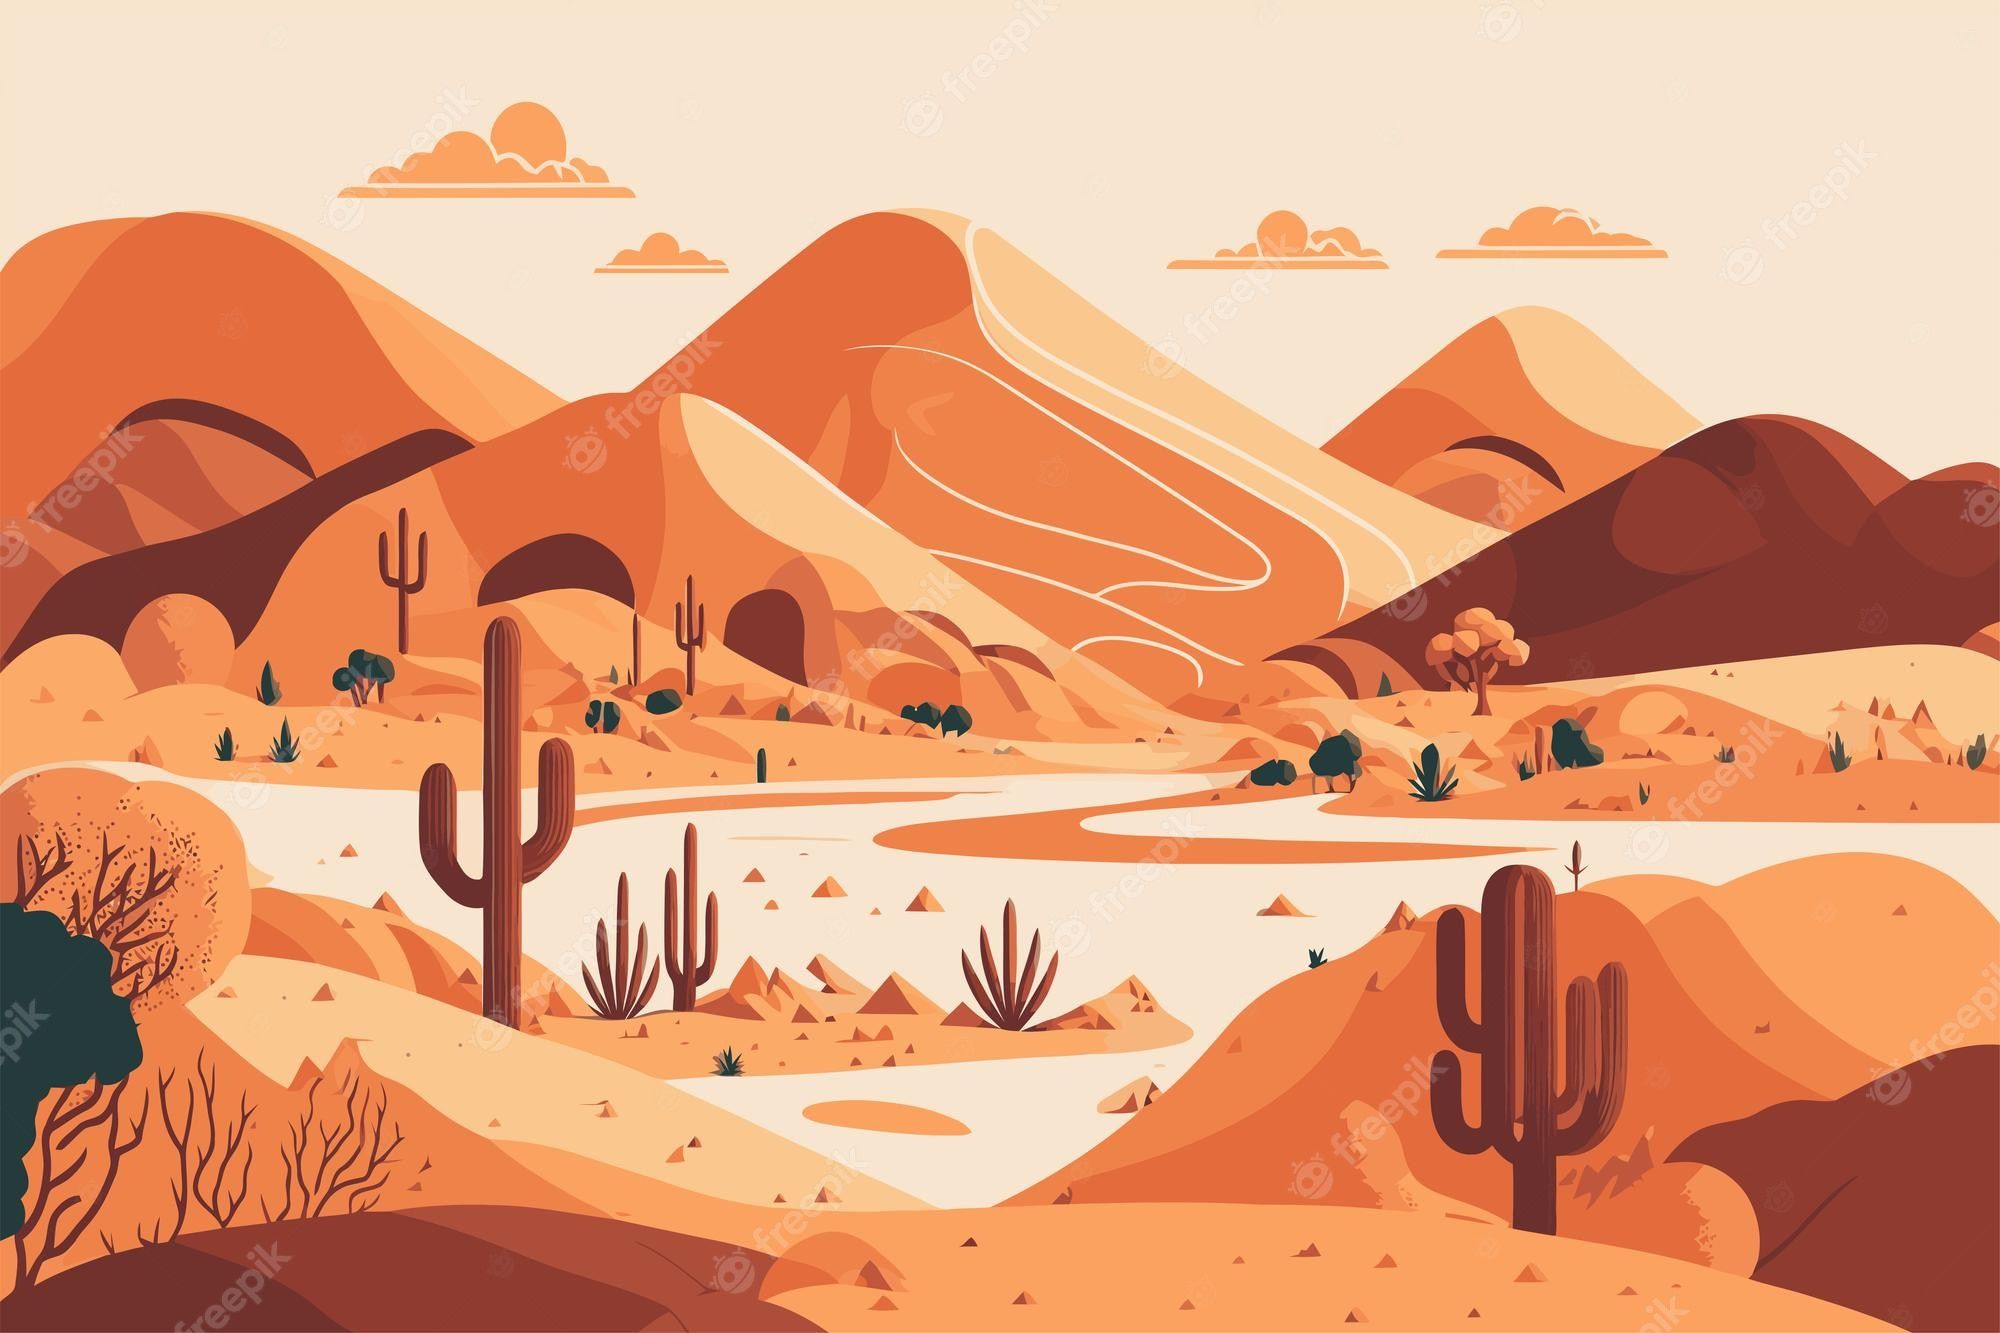 A desert landscape with mountains, cacti, and clouds - Desert